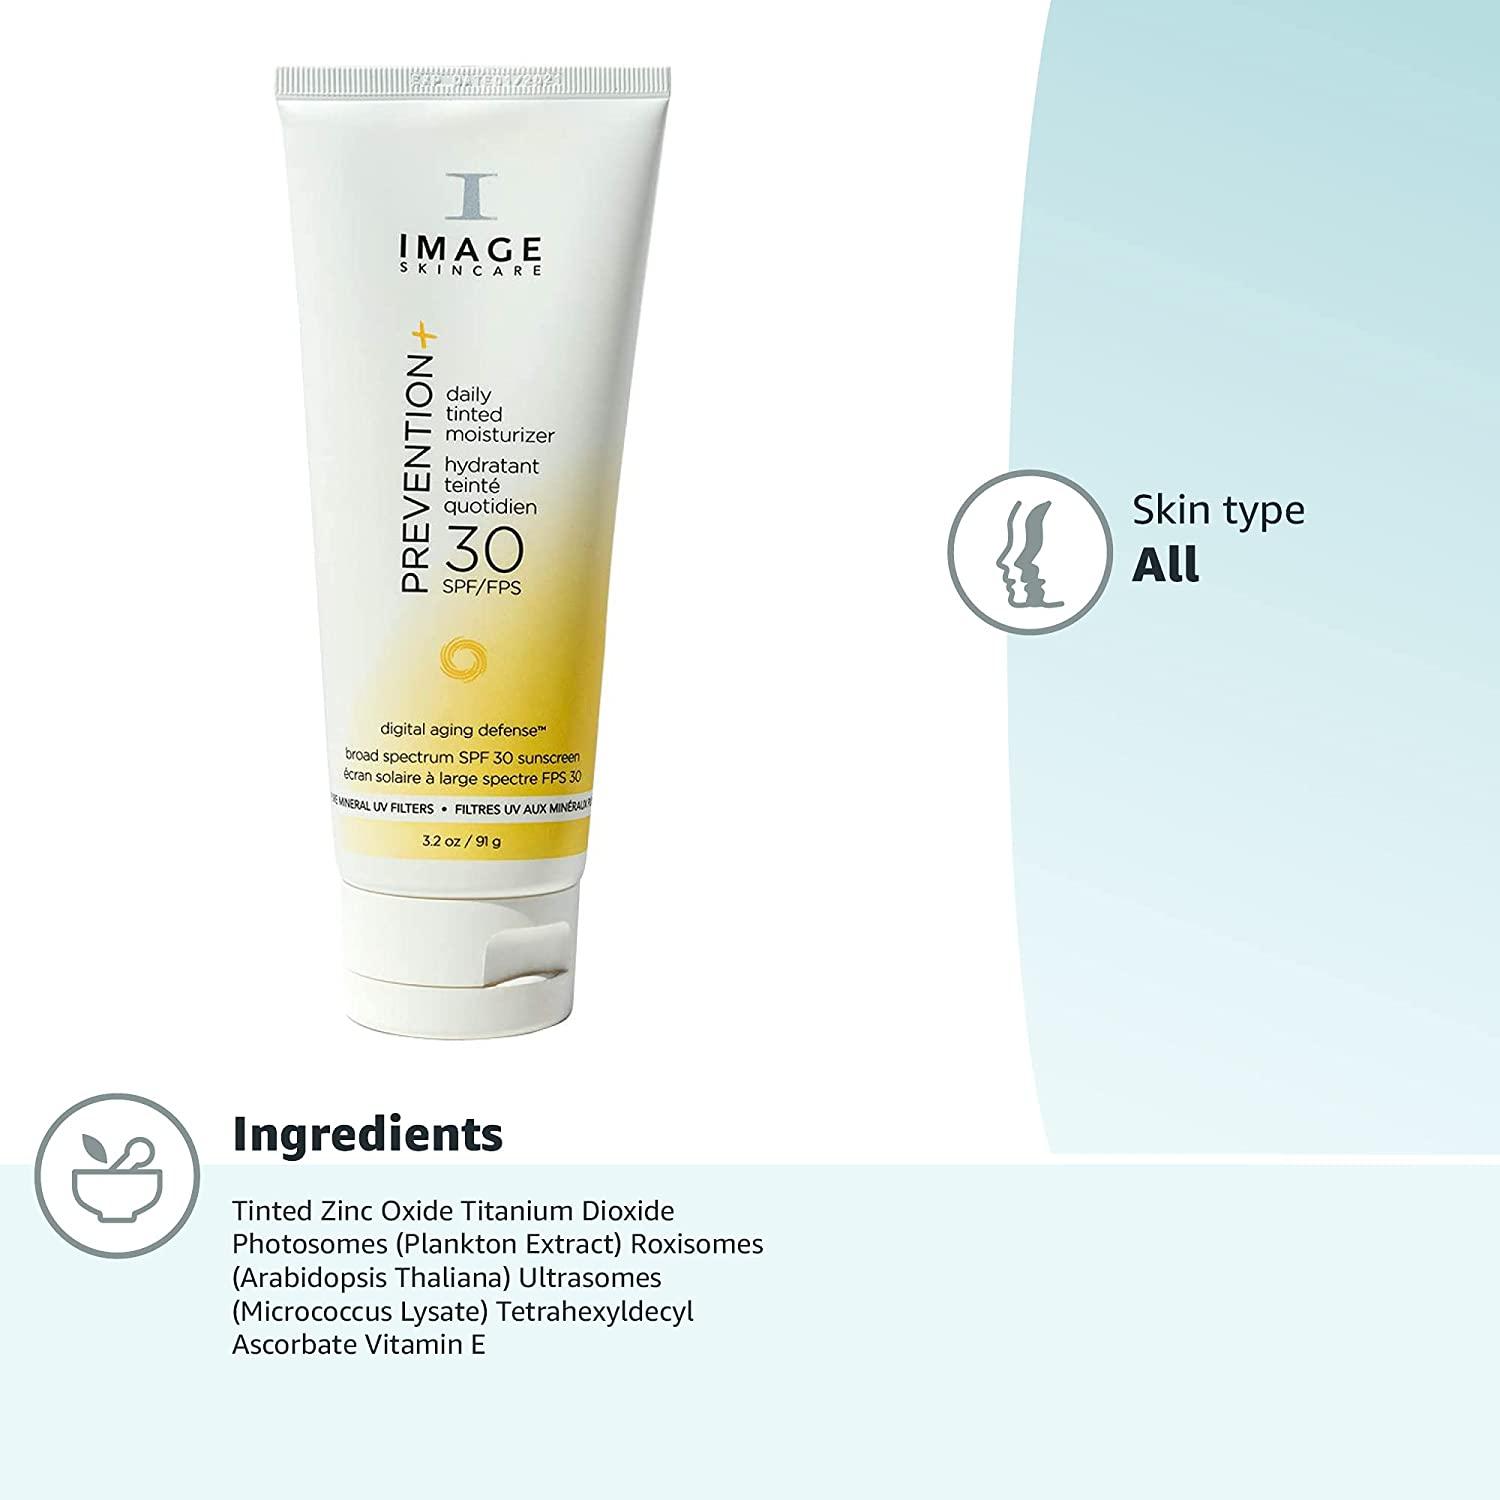 PREVENTION+® Daily Face Moisturizer with Sunscreen SPF 30